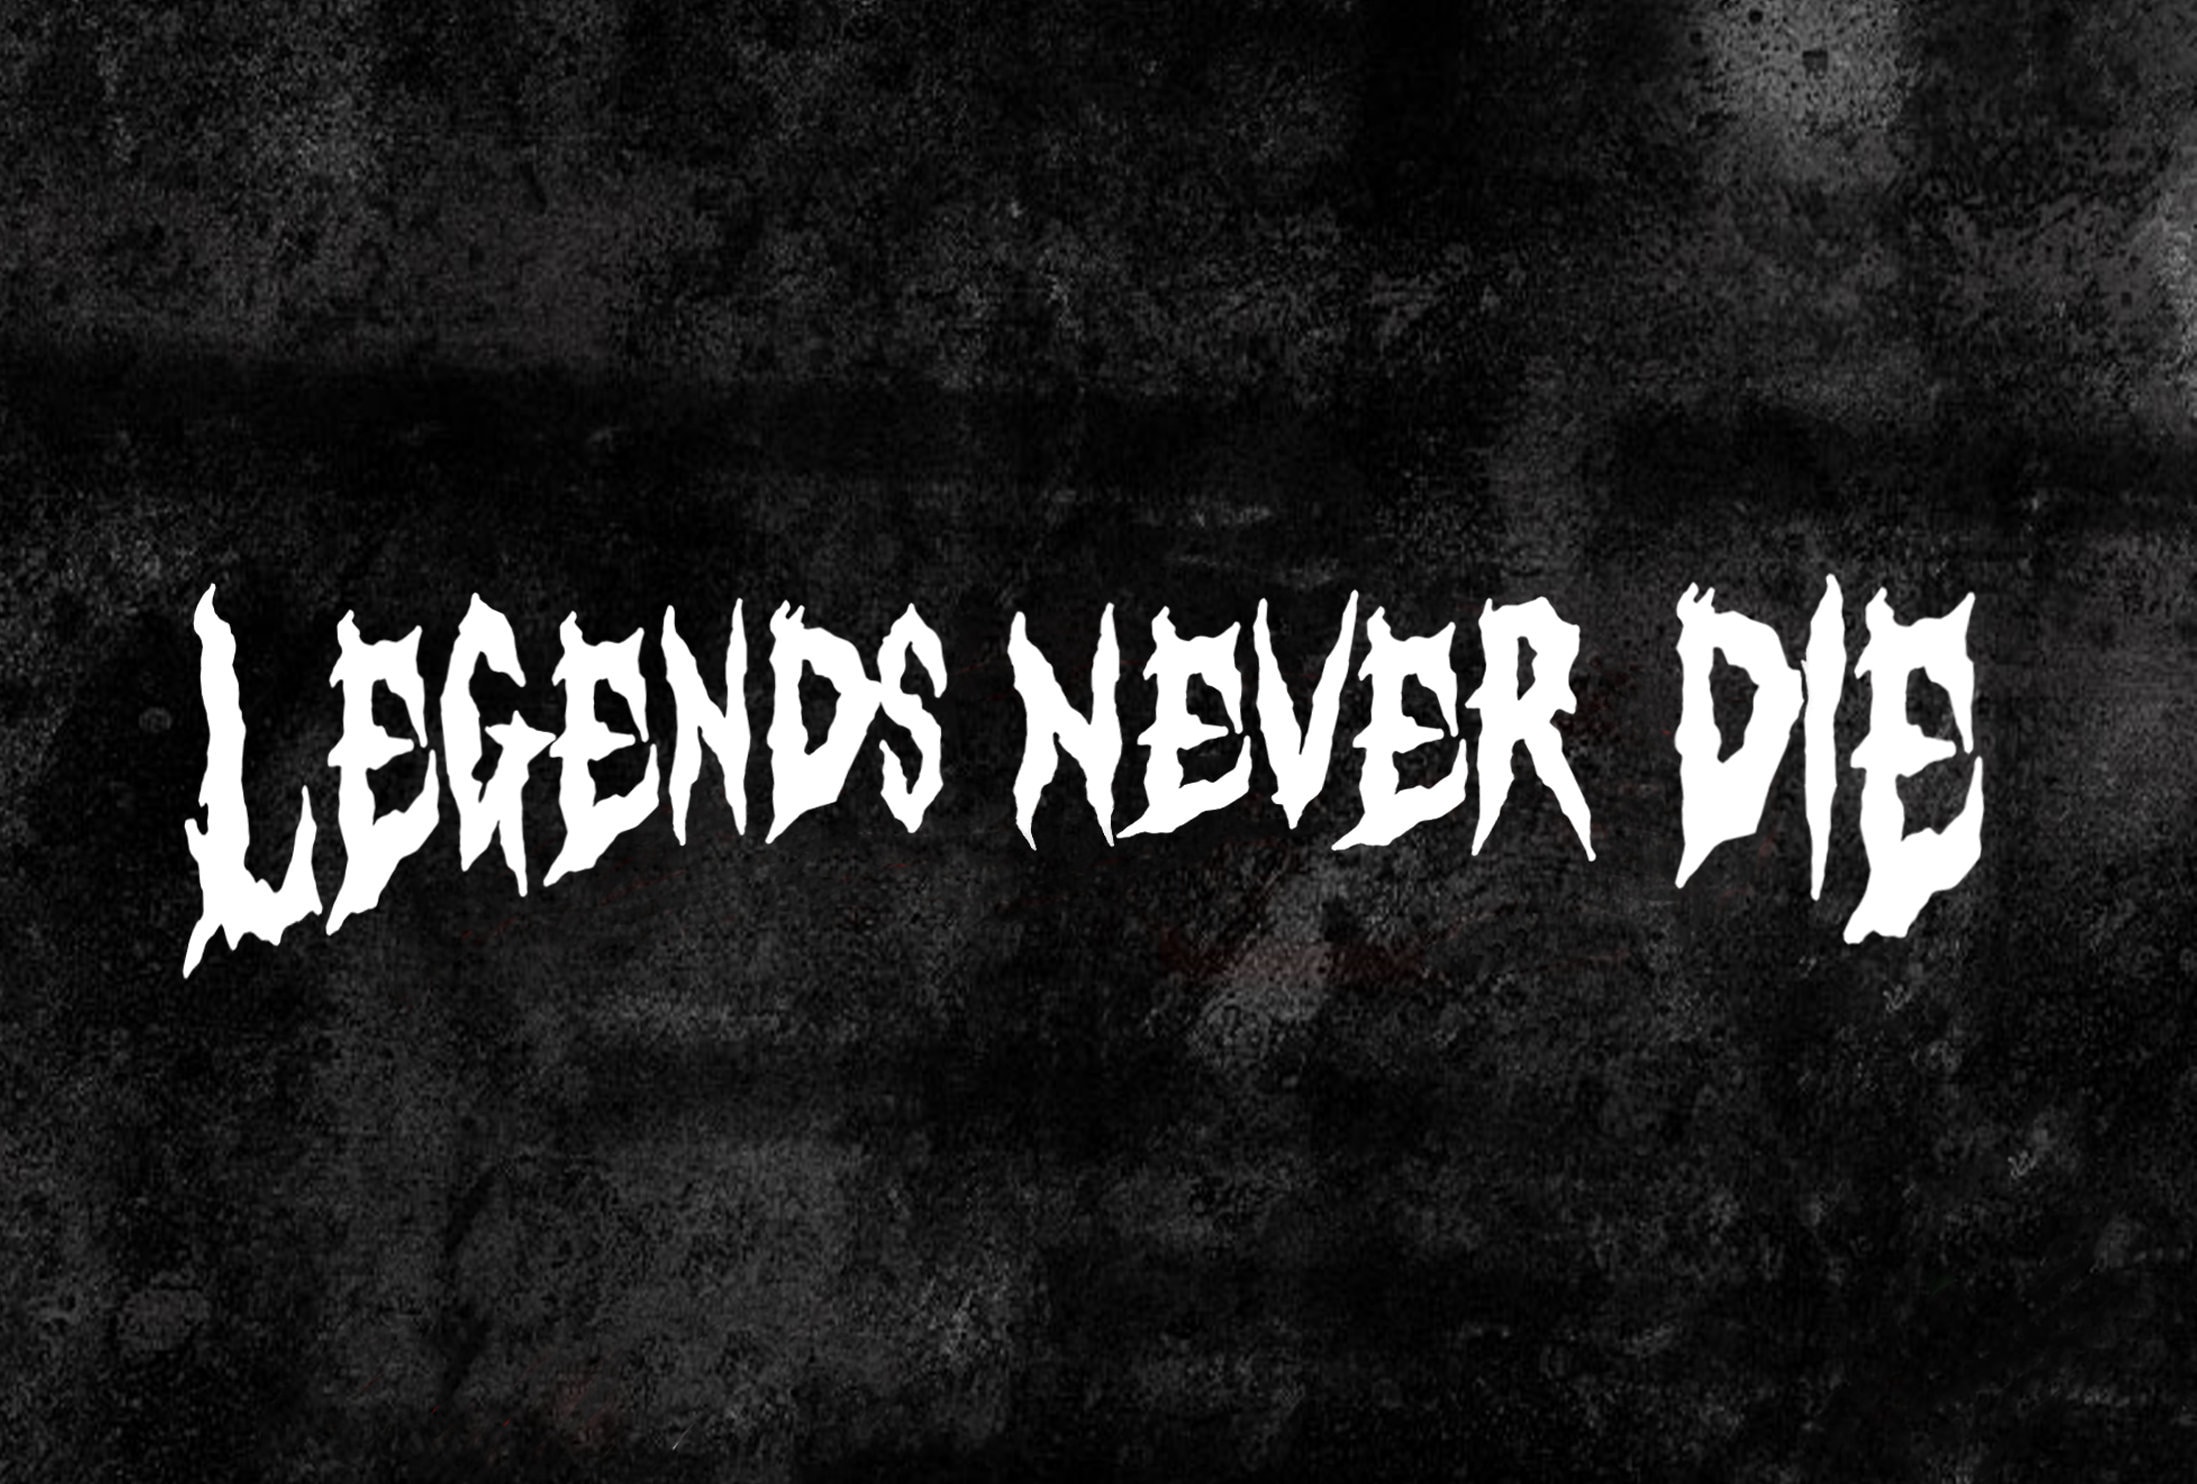 Never Dies Stickers for Sale